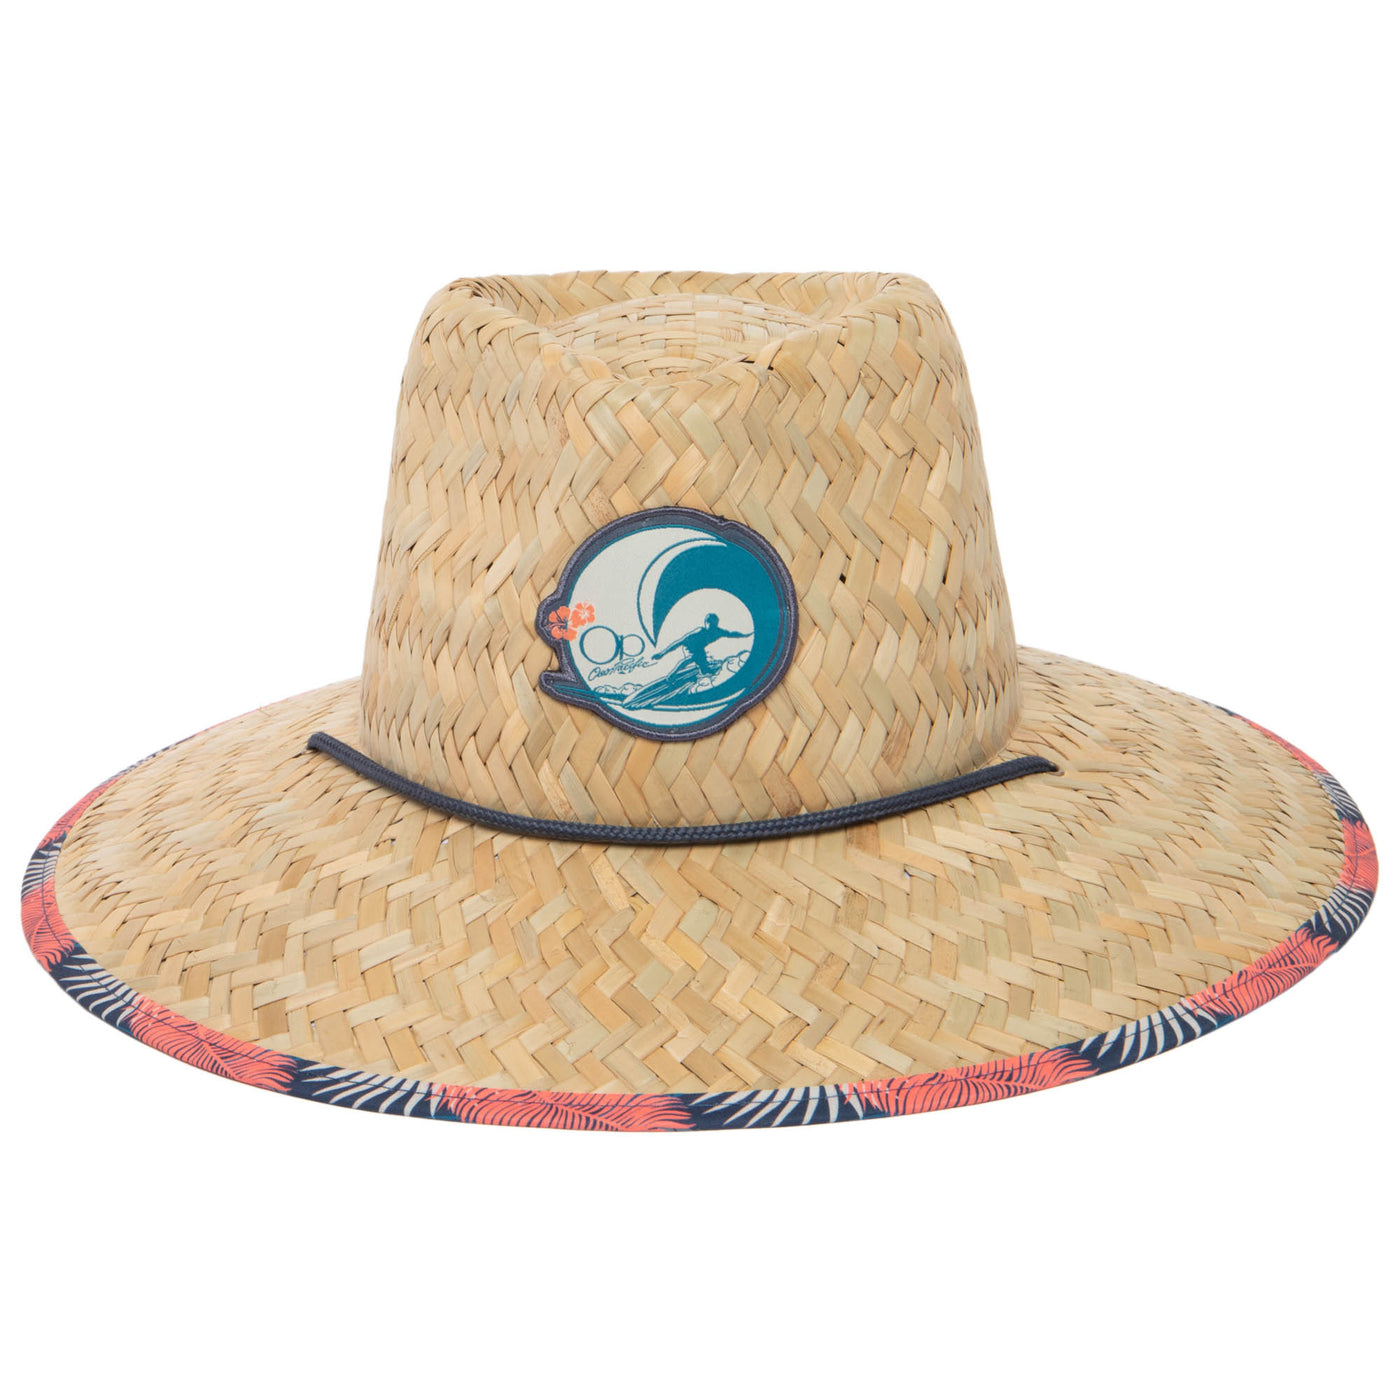 Wedge - Lifeguard Hat with Palm Leaf Print by Ocean Pacific-LIFEGUARD-San Diego Hat Company